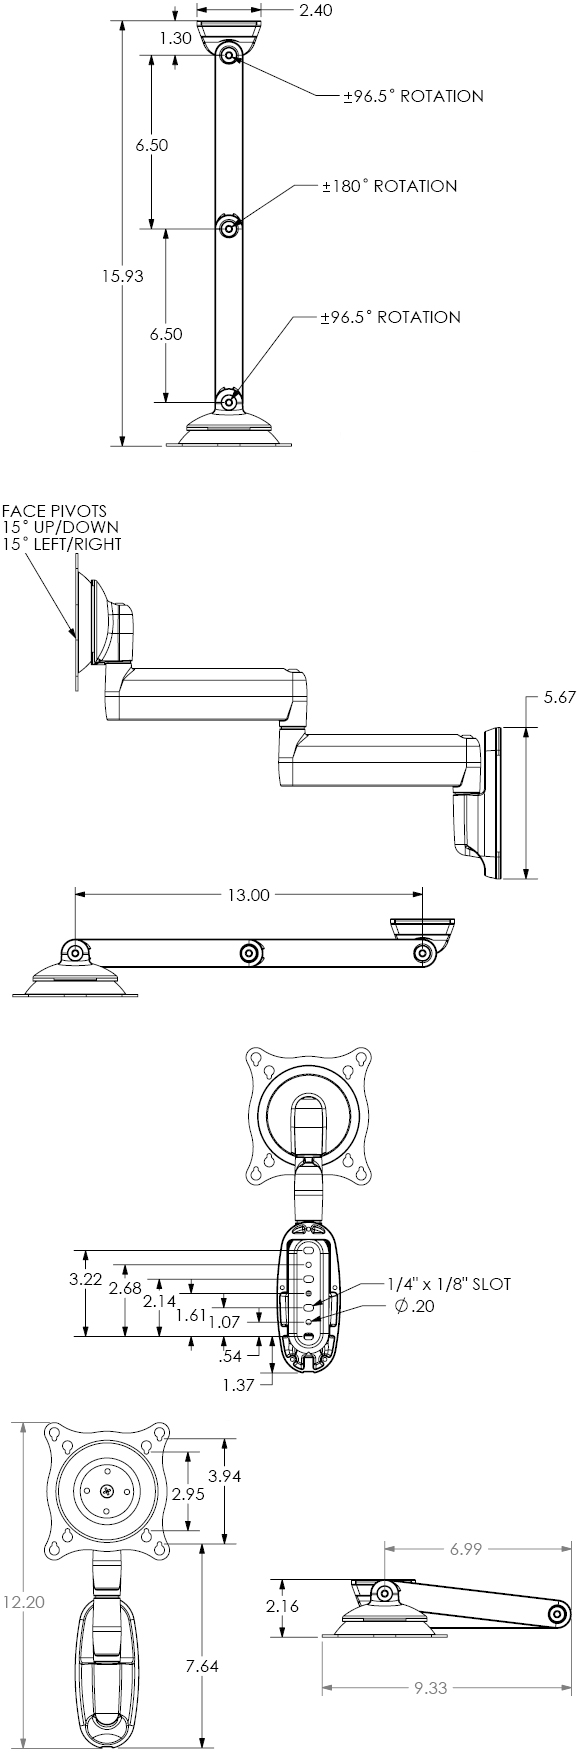 Technical Drawing for Chief FWD Wall Mount Flat Panel Dual Swing LCD Arm